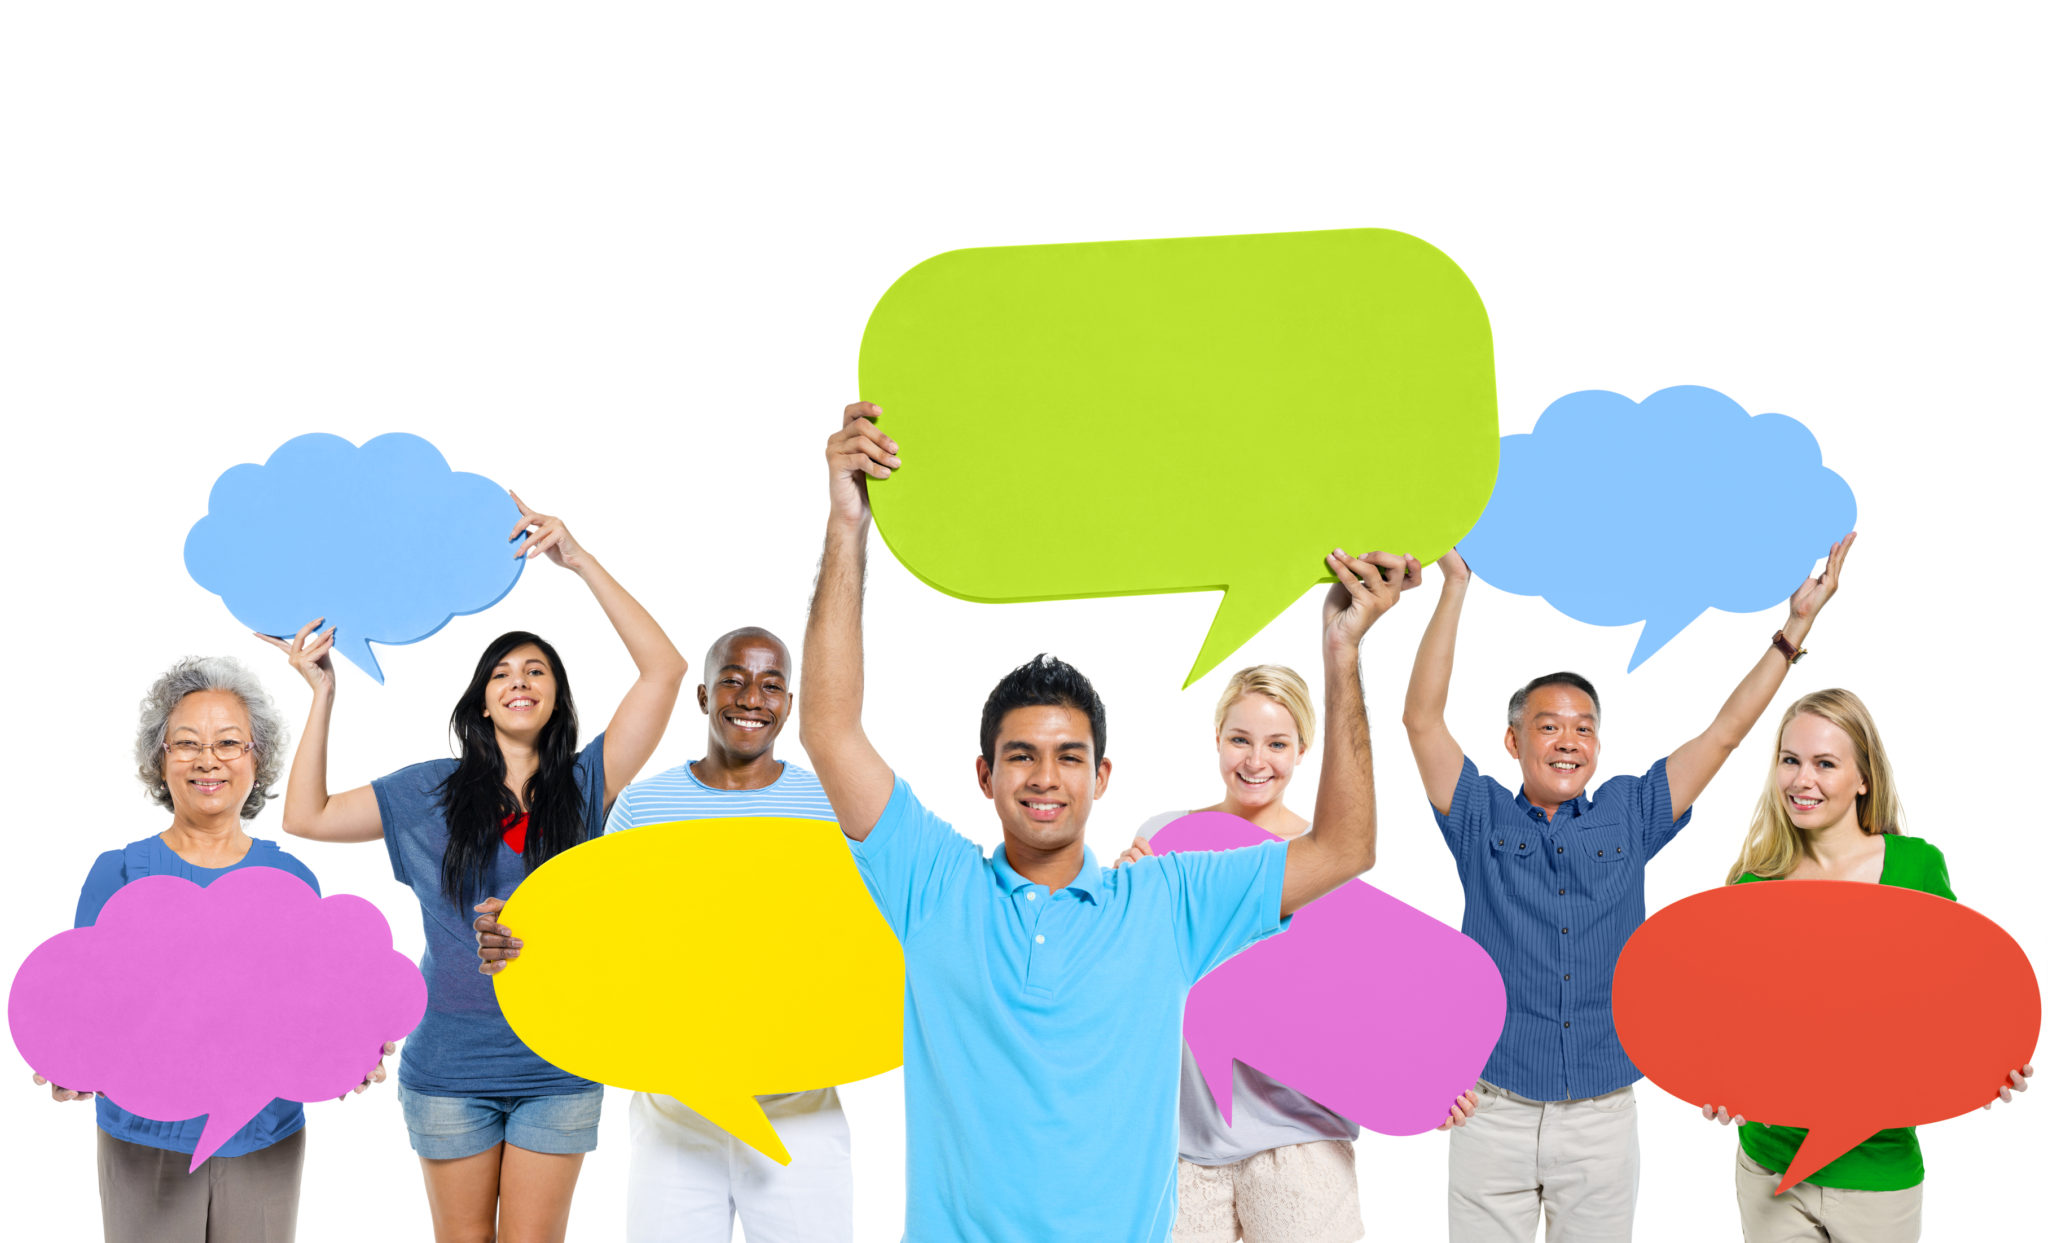 image of people with speech bubbles